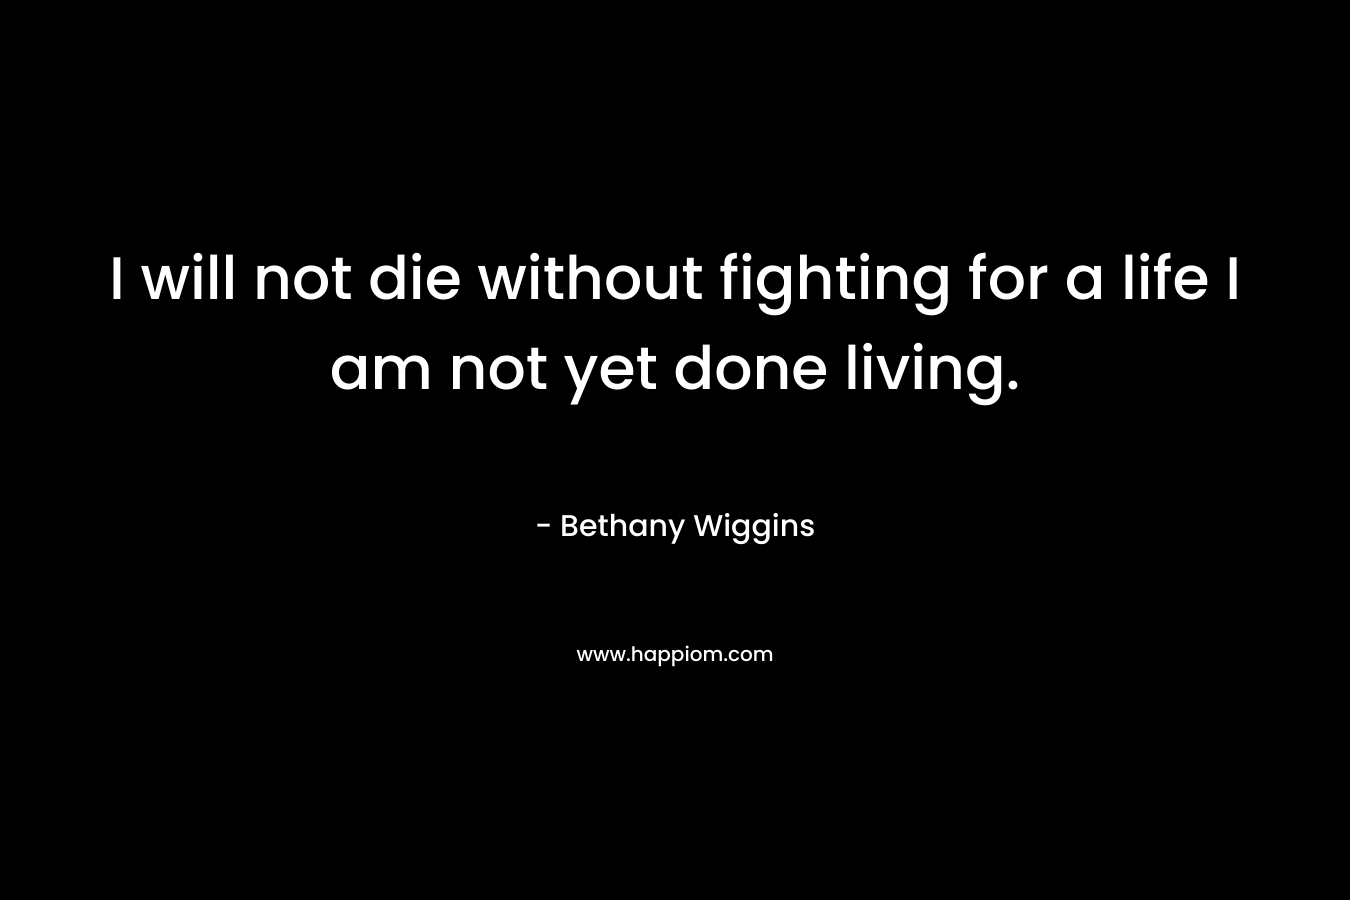 I will not die without fighting for a life I am not yet done living.